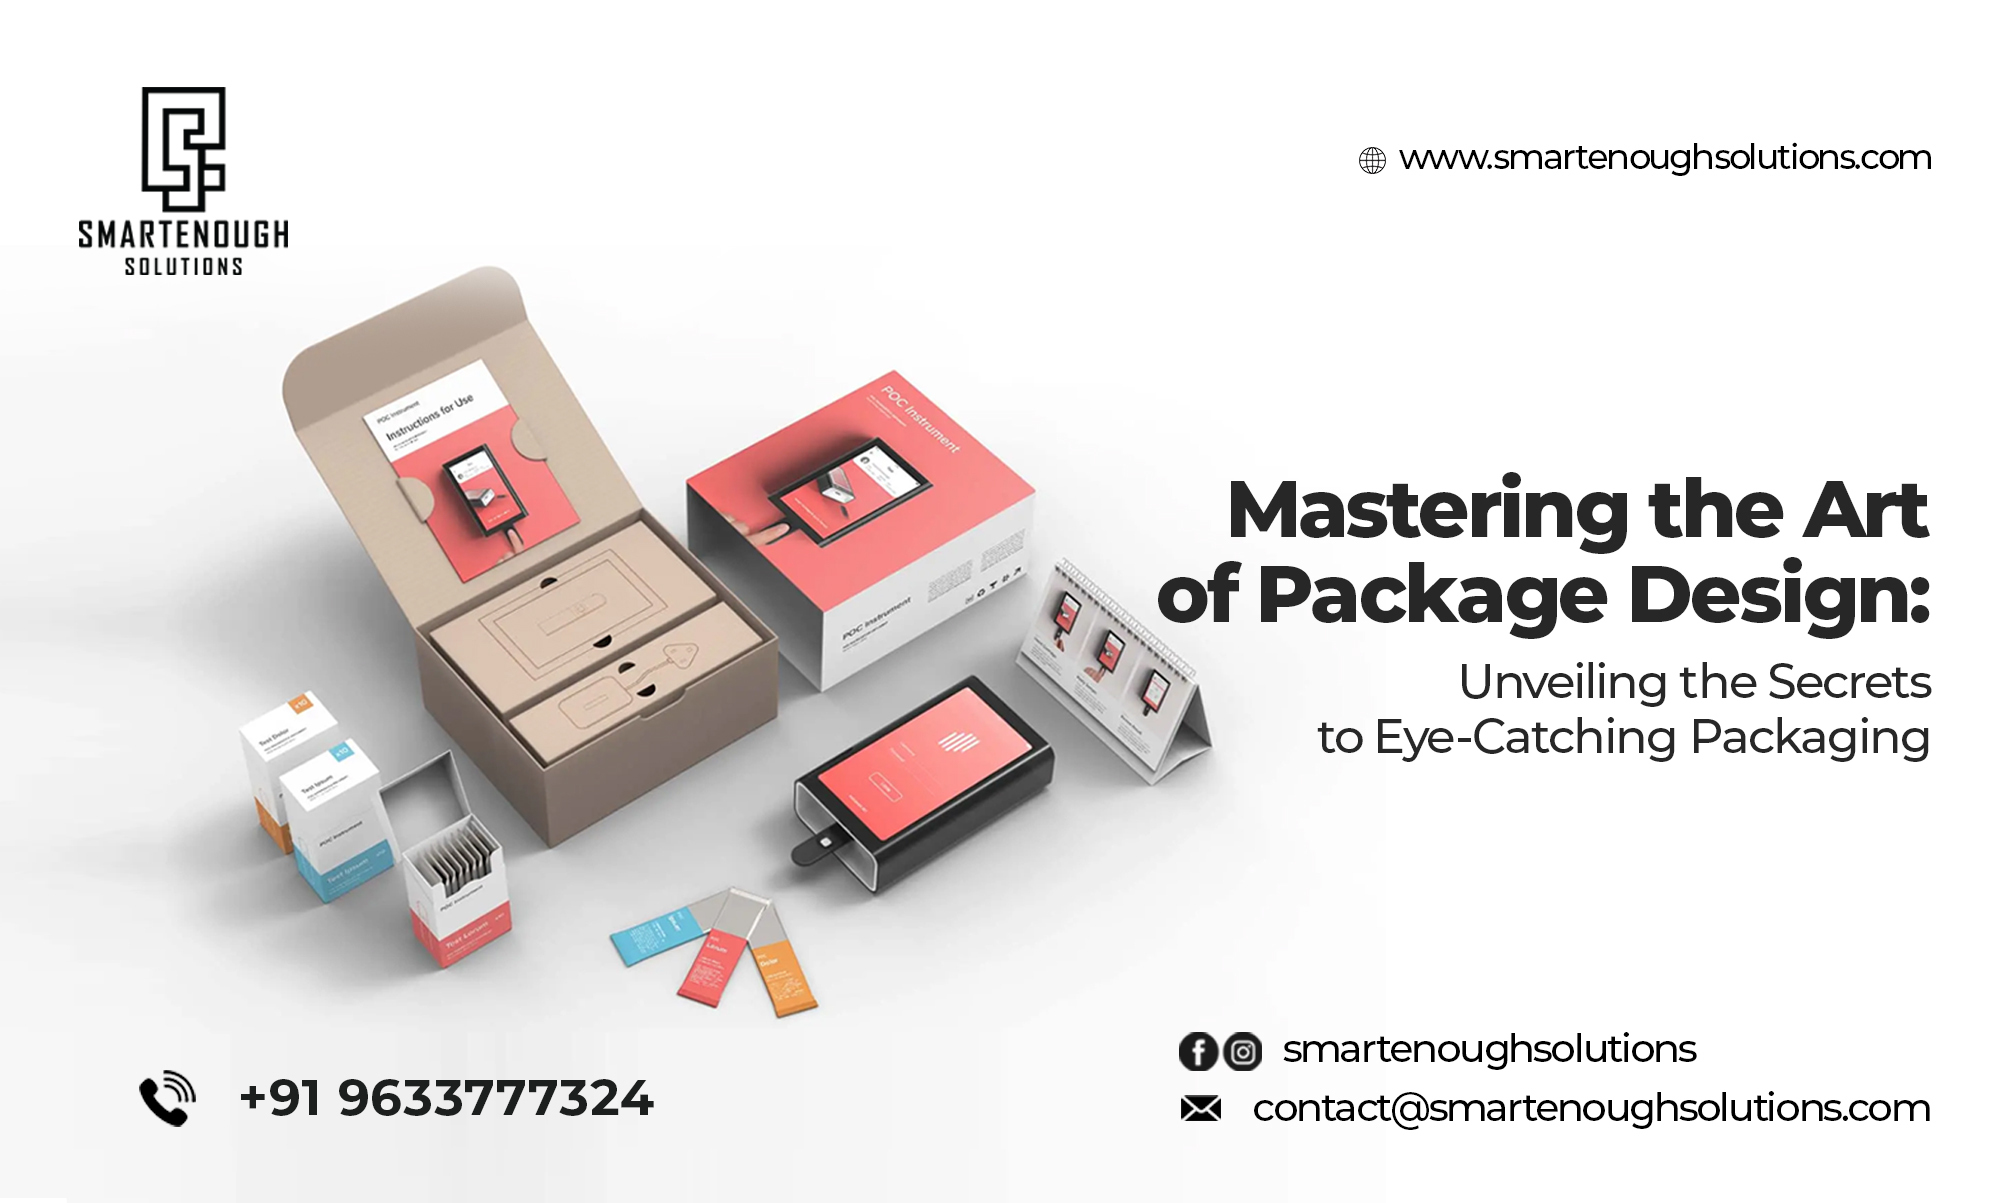 Mastering The Art Of Package Design: Unveiling The Secrets To Eye-Catching Packaging